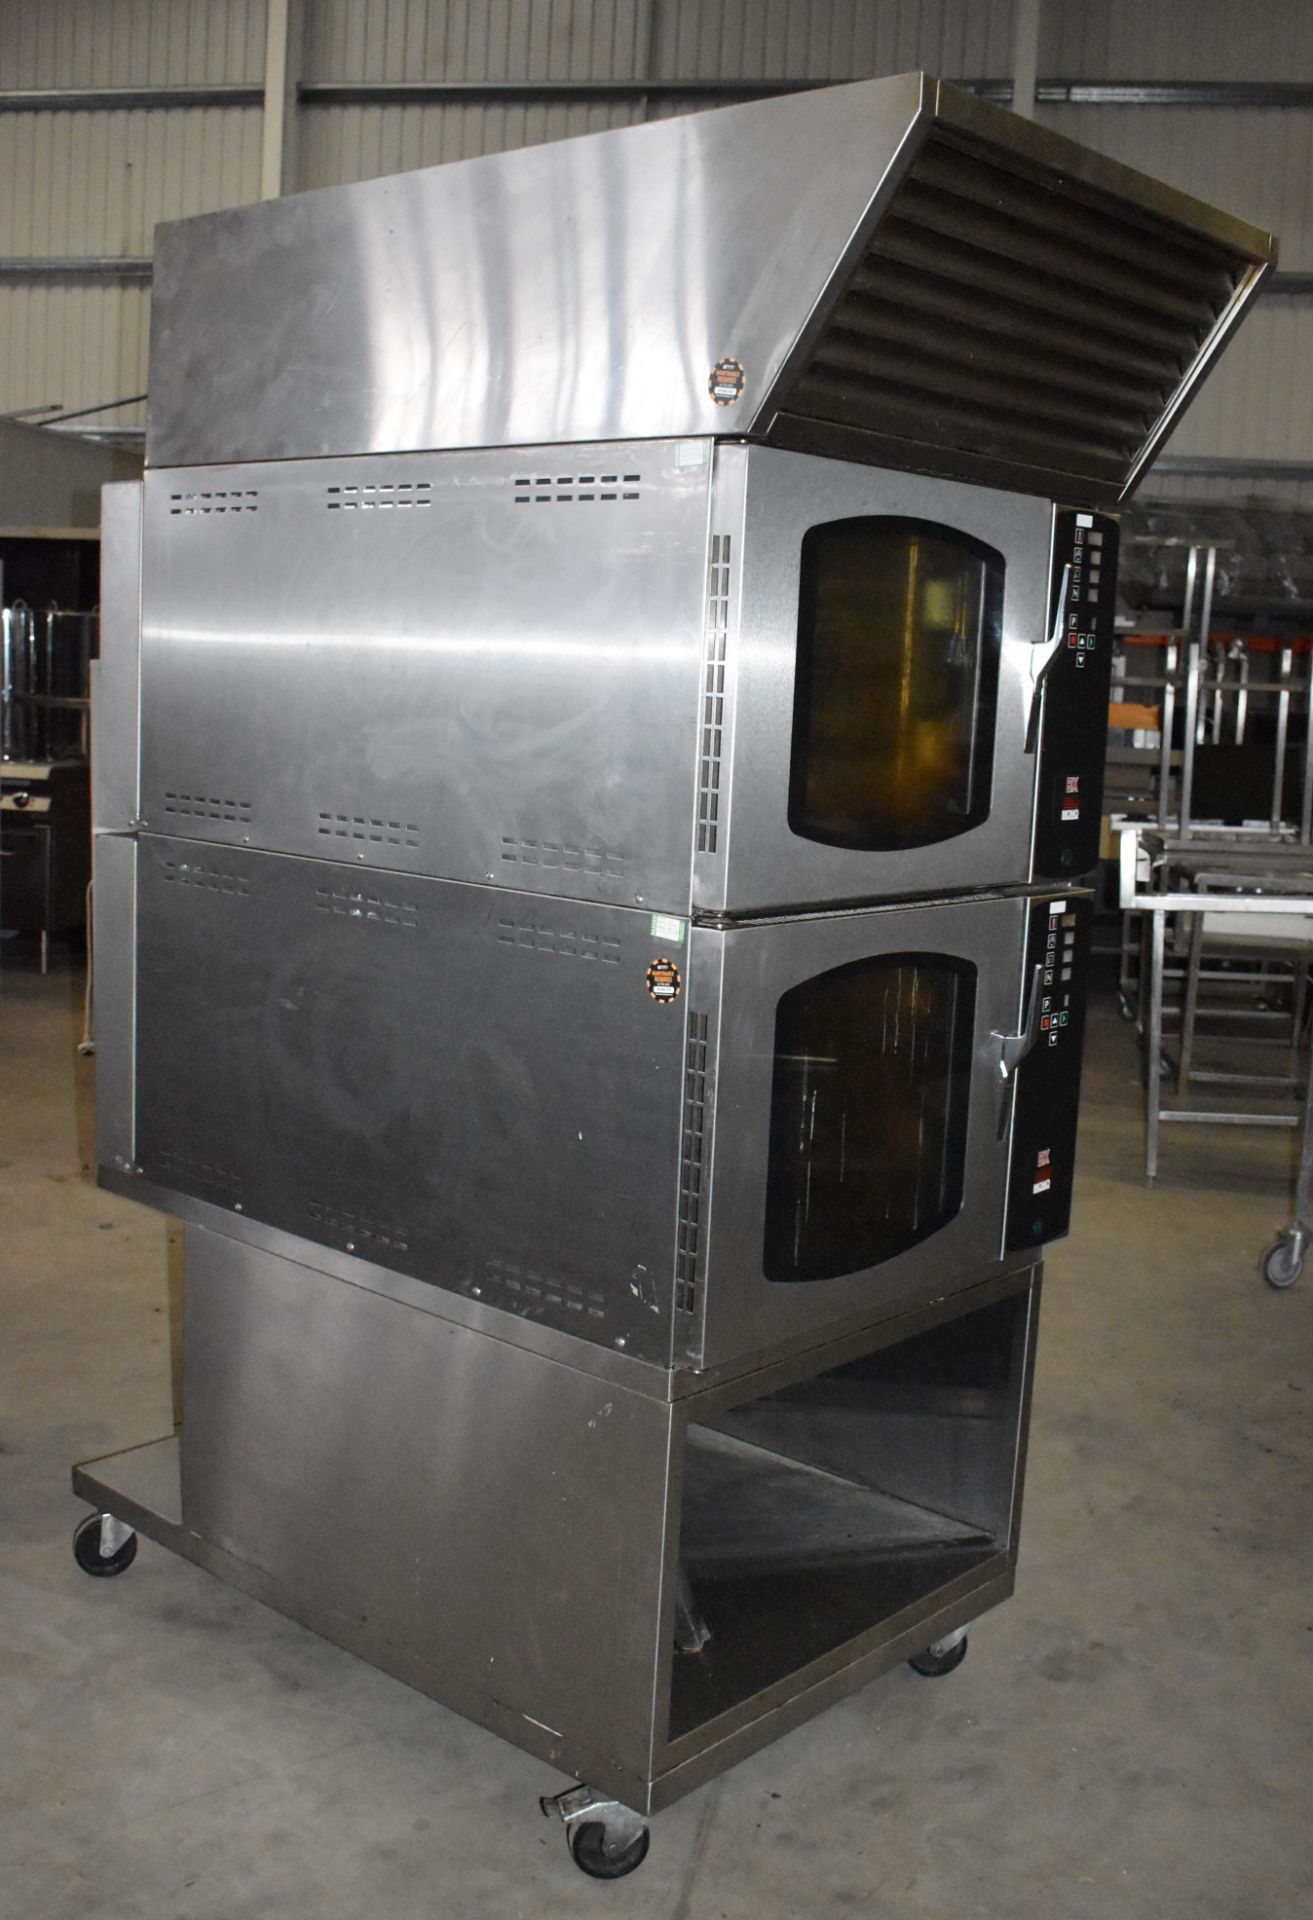 1 x Mono Double Classic and Steam BX Convection Oven - Model FG159C - 3 Phase Power - H210 x W83 x - Image 10 of 15